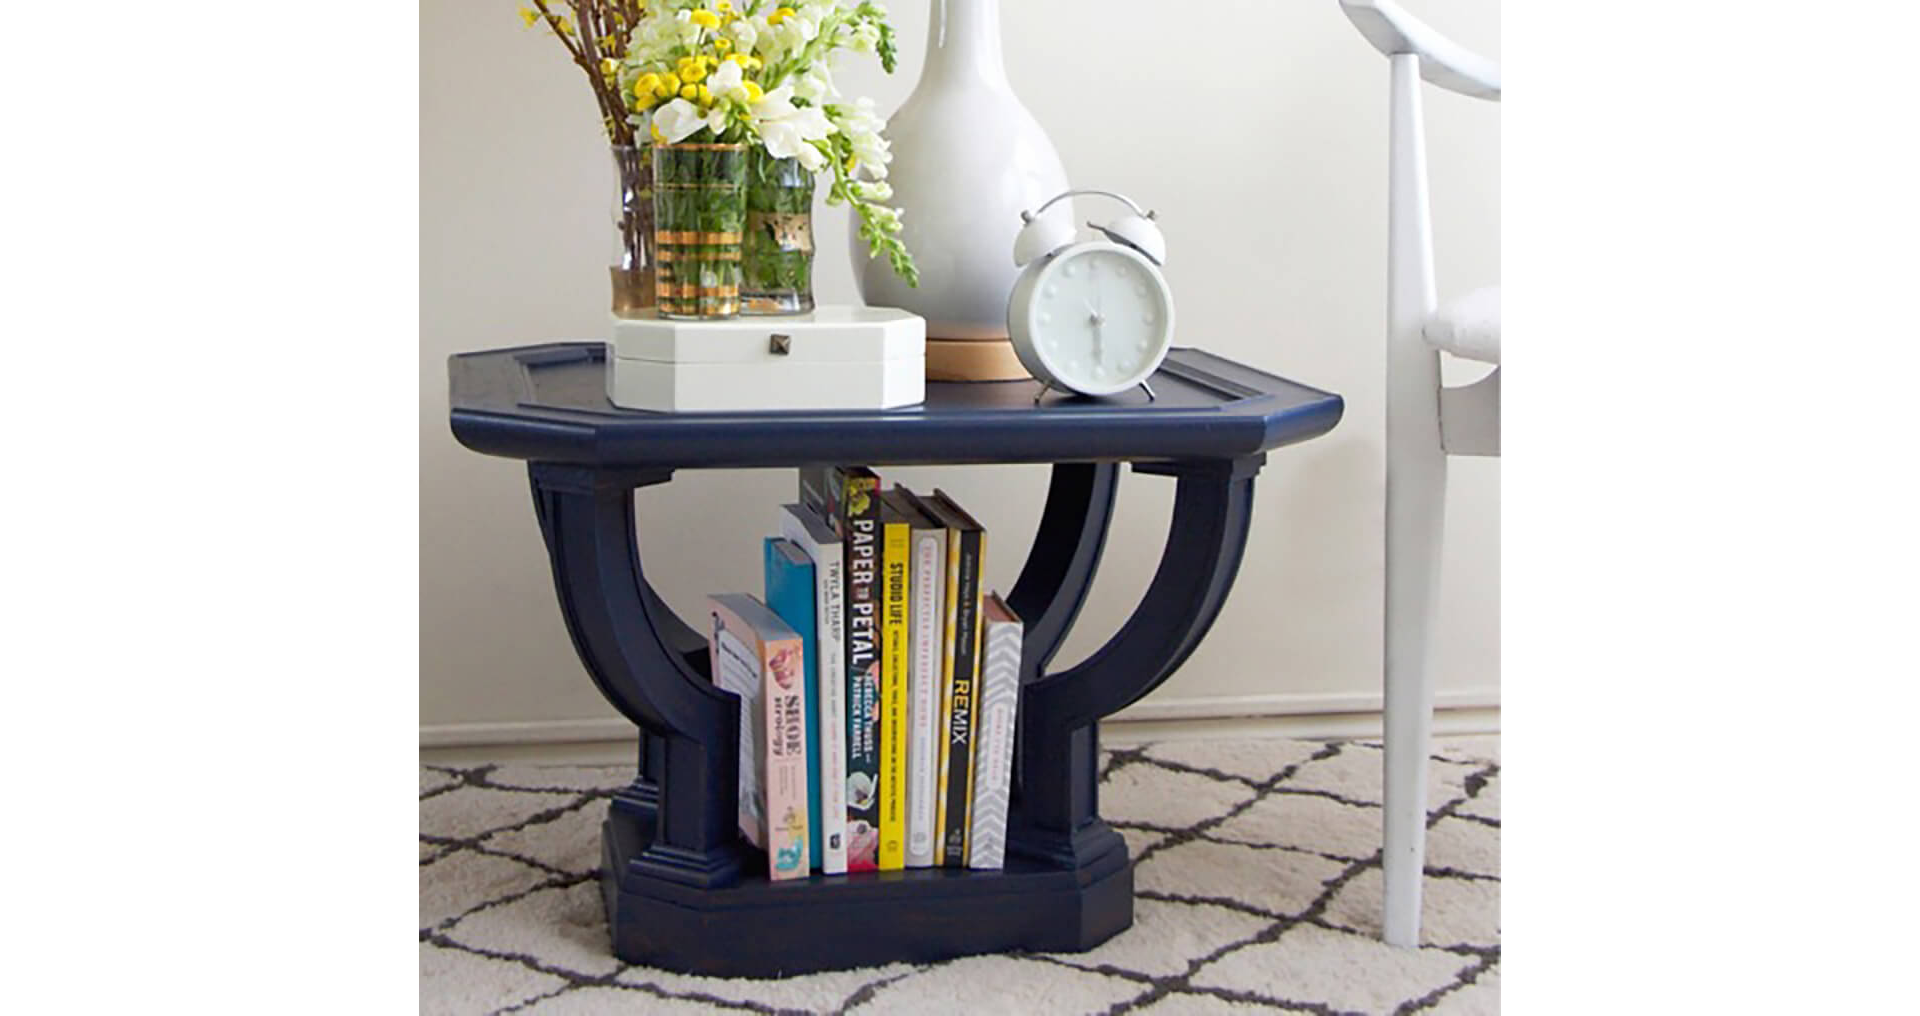 A navy blue end table with books and magazines. S-W color featured: SW 6244 Naval.